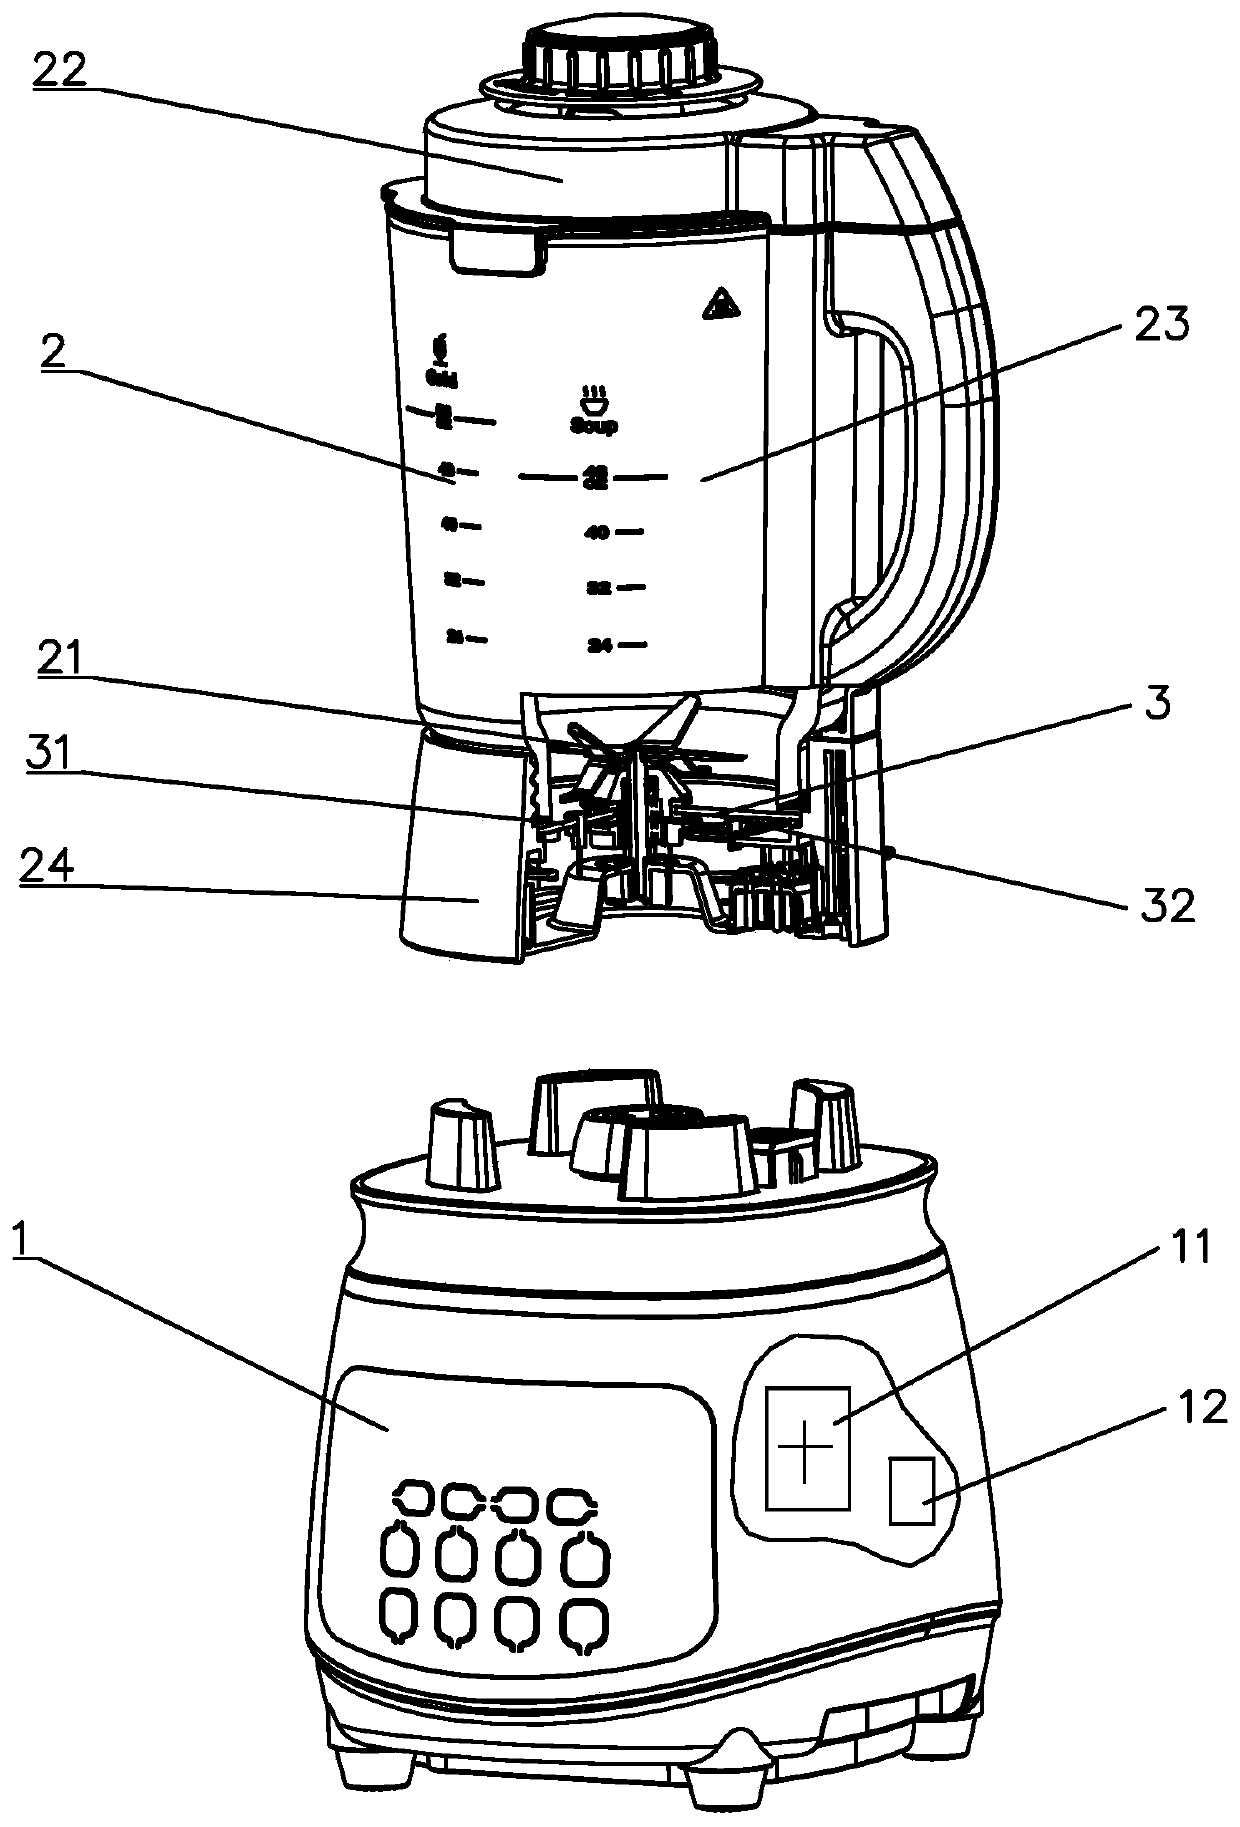 Method for quickly making hot beverage by food processor